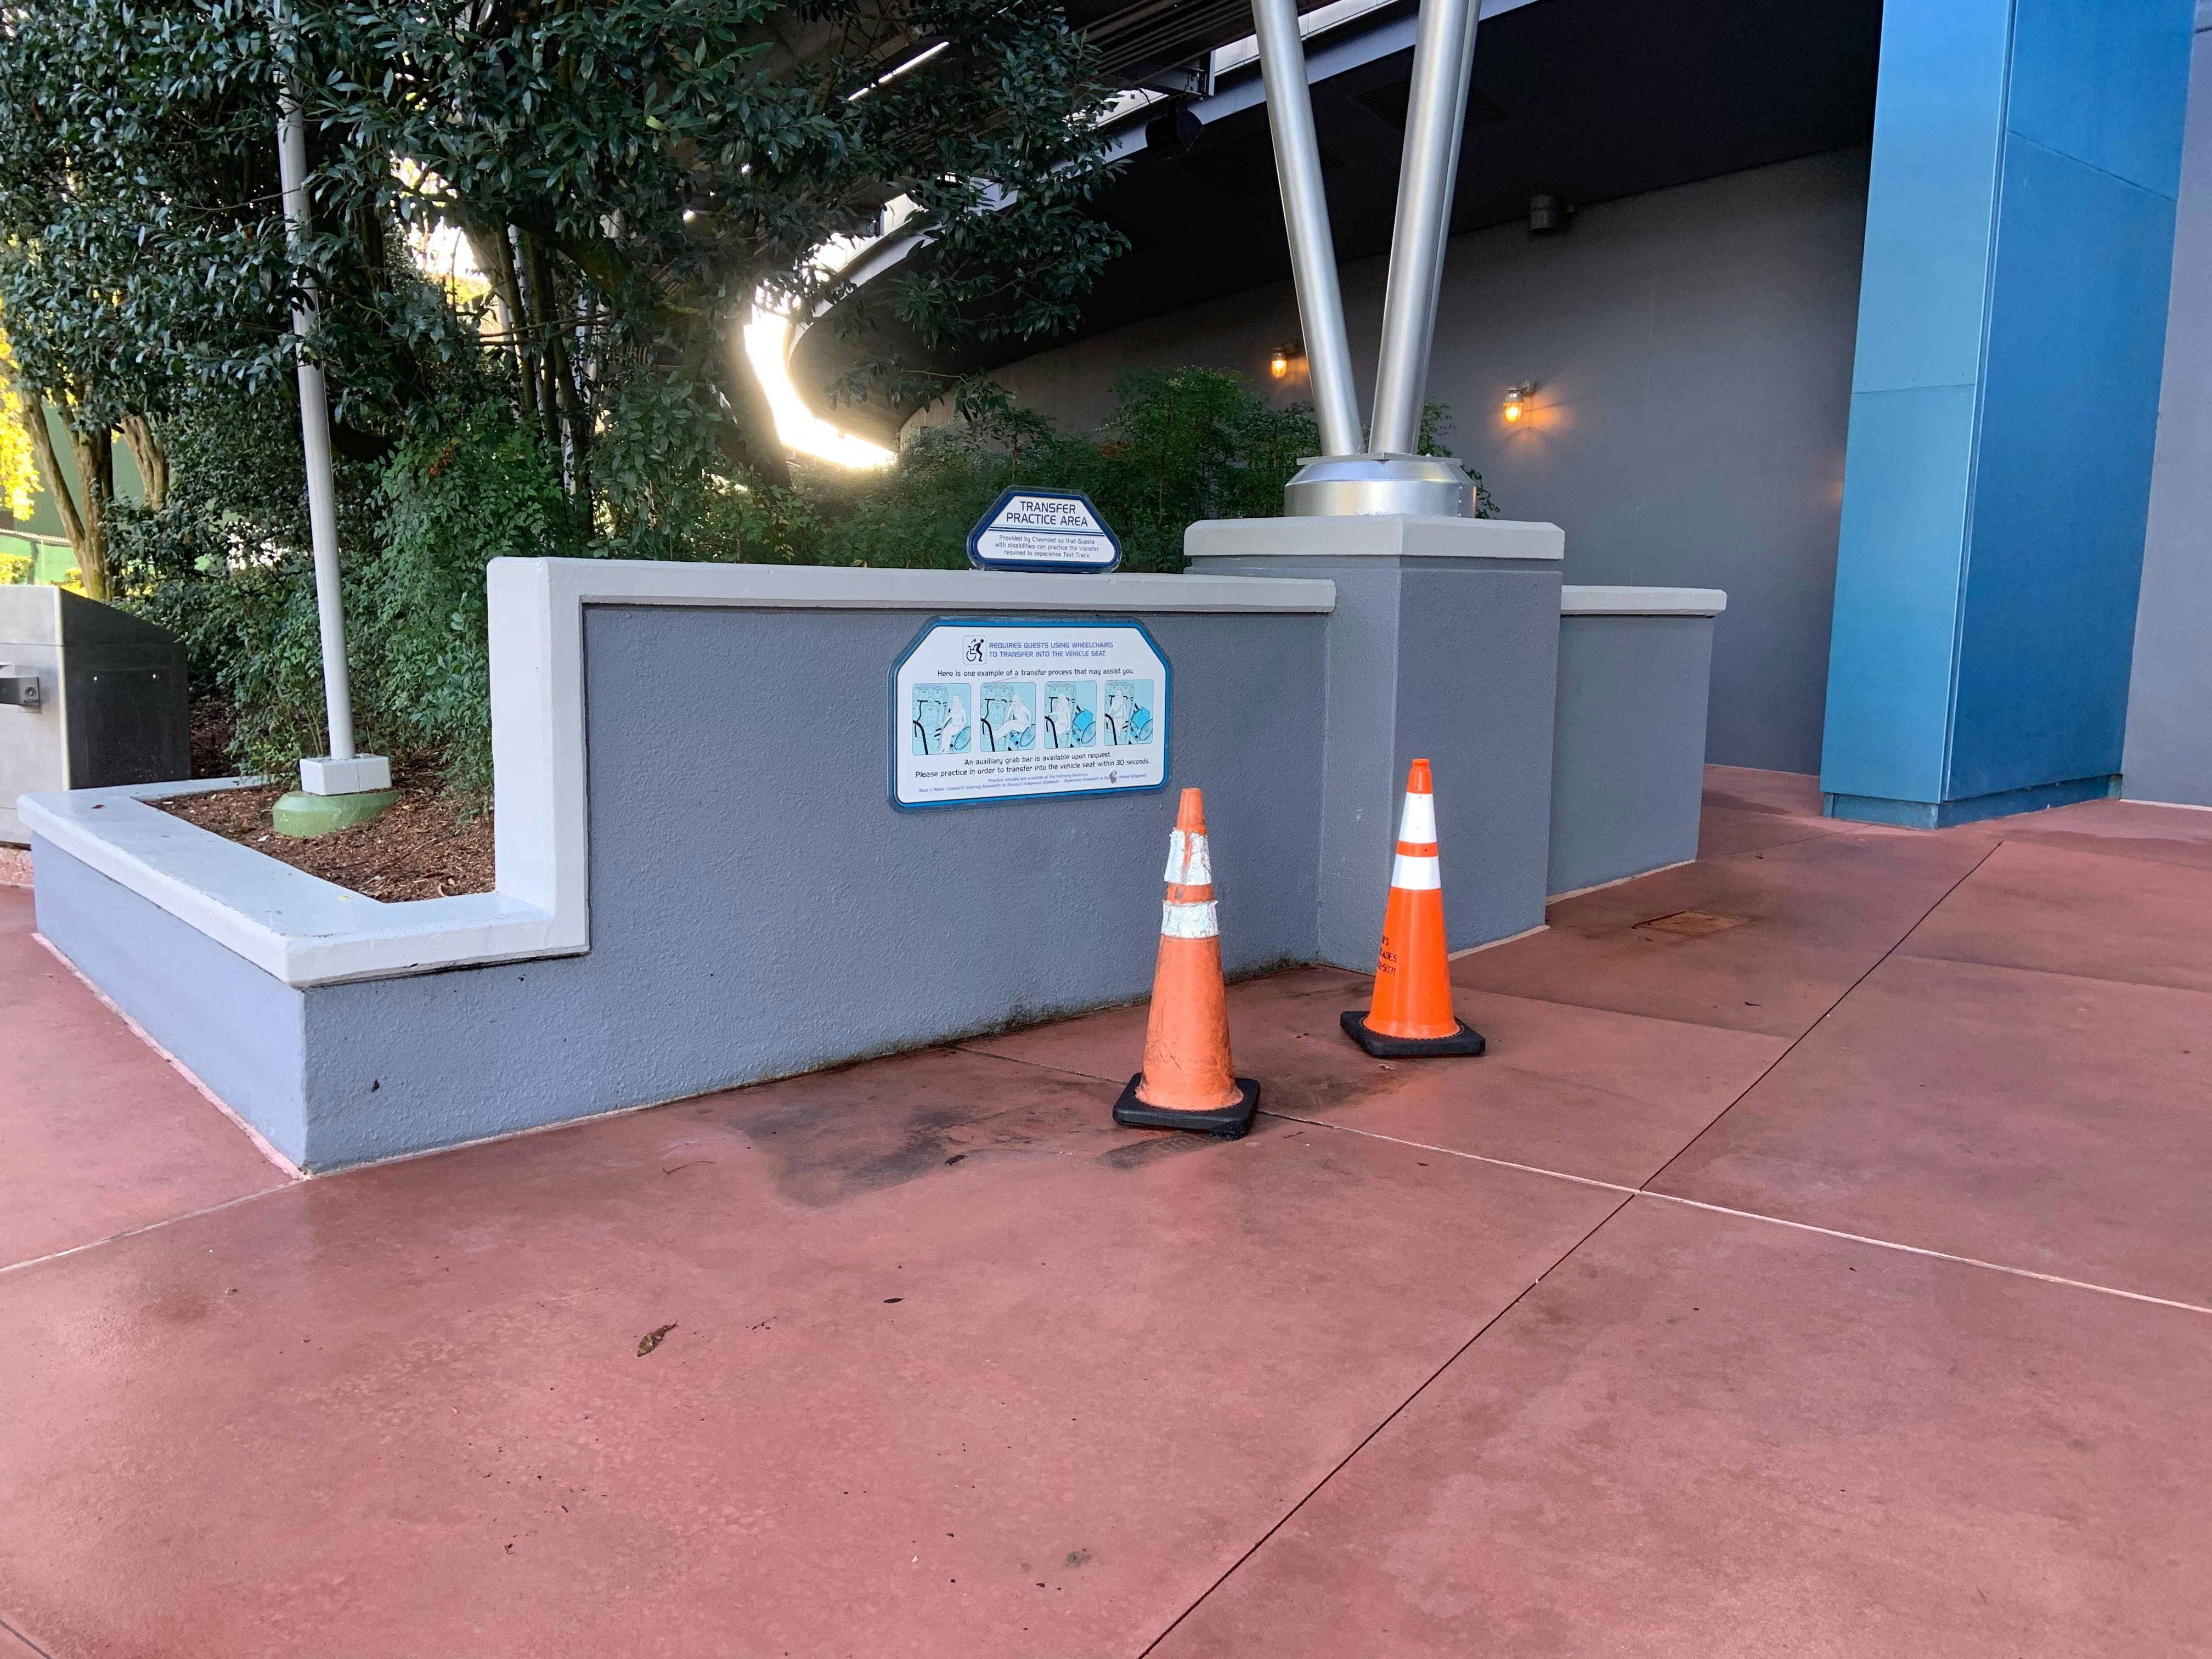 PHOTOS Construction Walls Erected at Test Track; Now Closed for